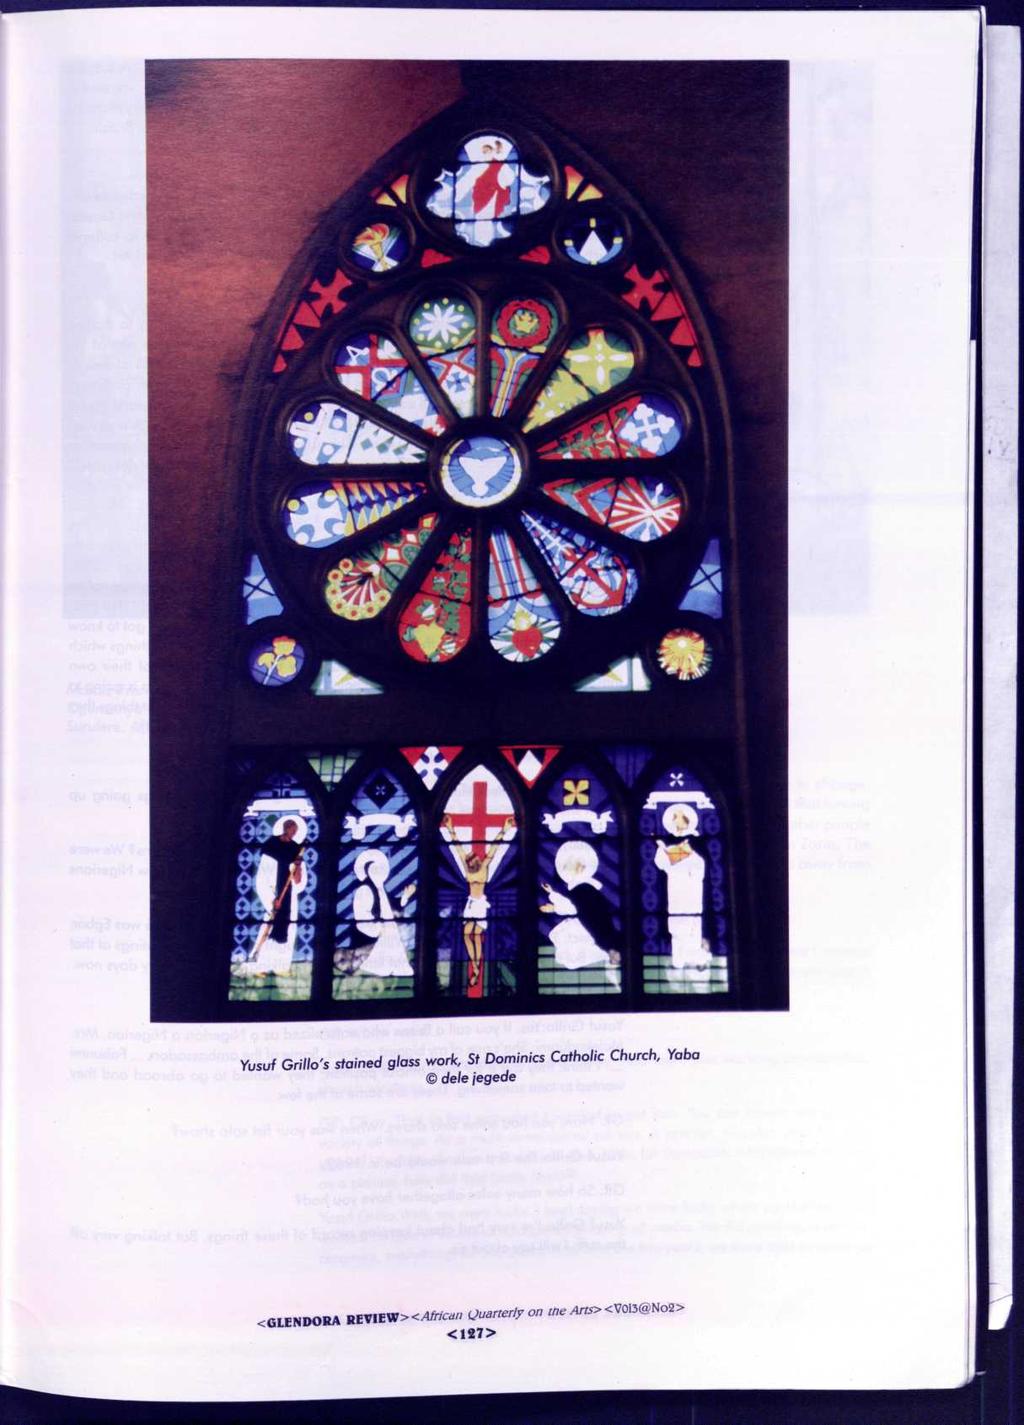 Yusuf Grilh's stained glass work, St Dominies Catholic Church, Yaba